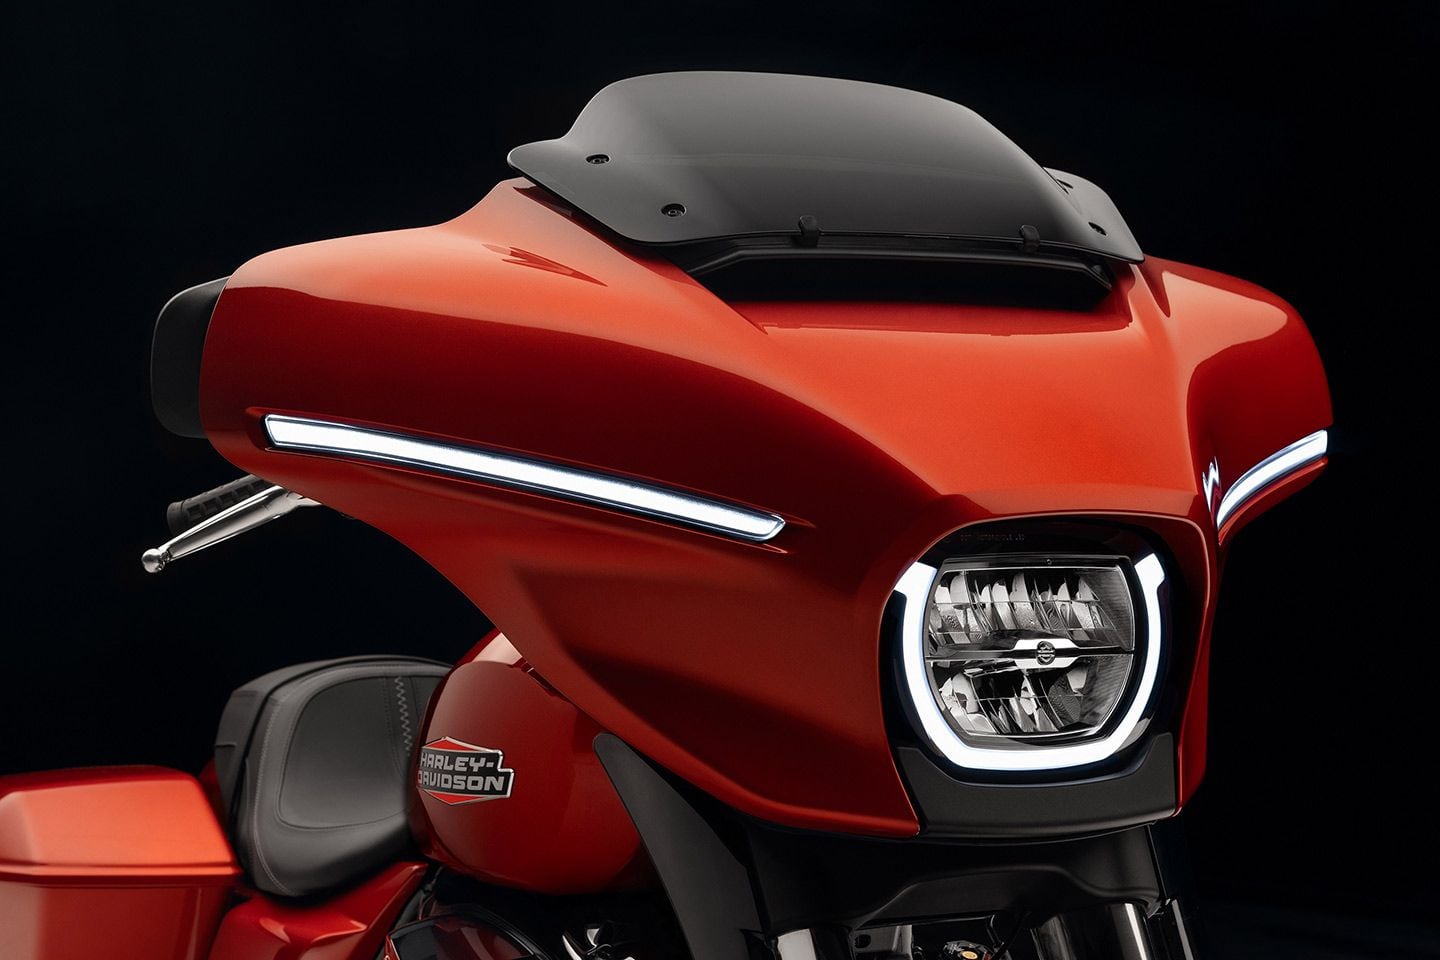 New LED lighting strips and adjustable air vanes mark the fork-mounted batwing fairing on the 2024 Street Glide.